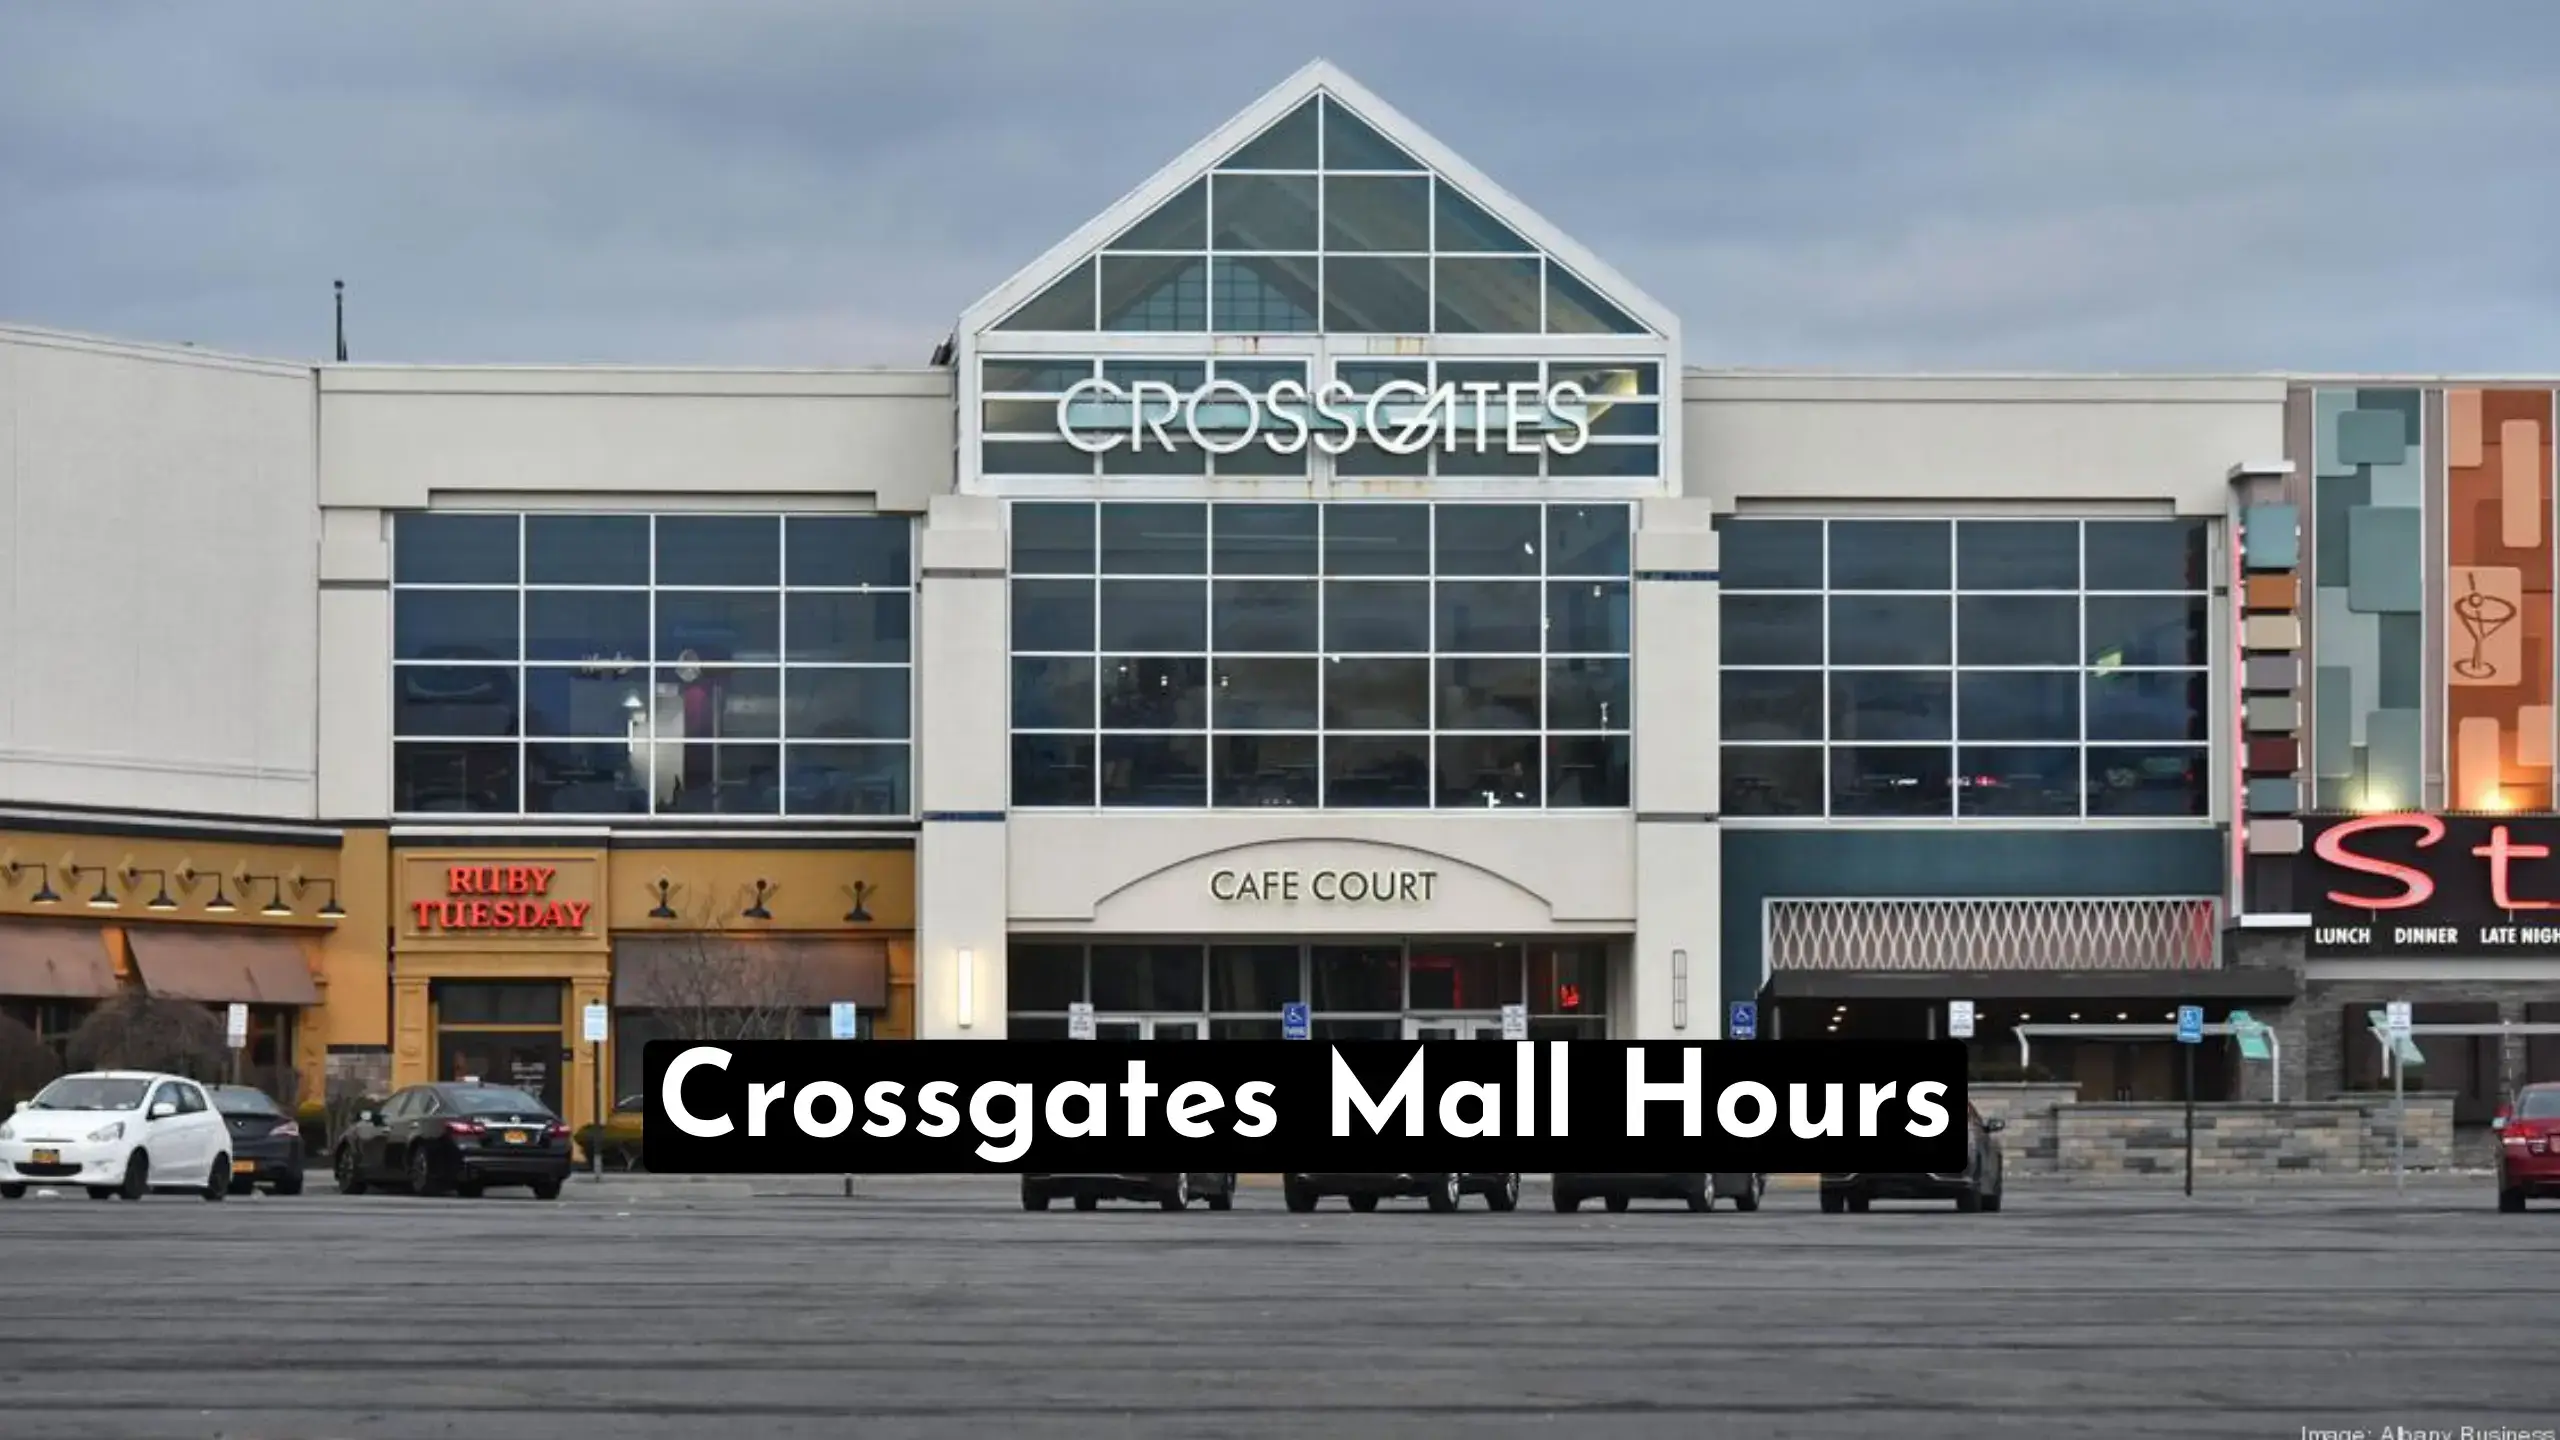 Crossgates Mall Hours: Find The Best Time to Visit The Mall